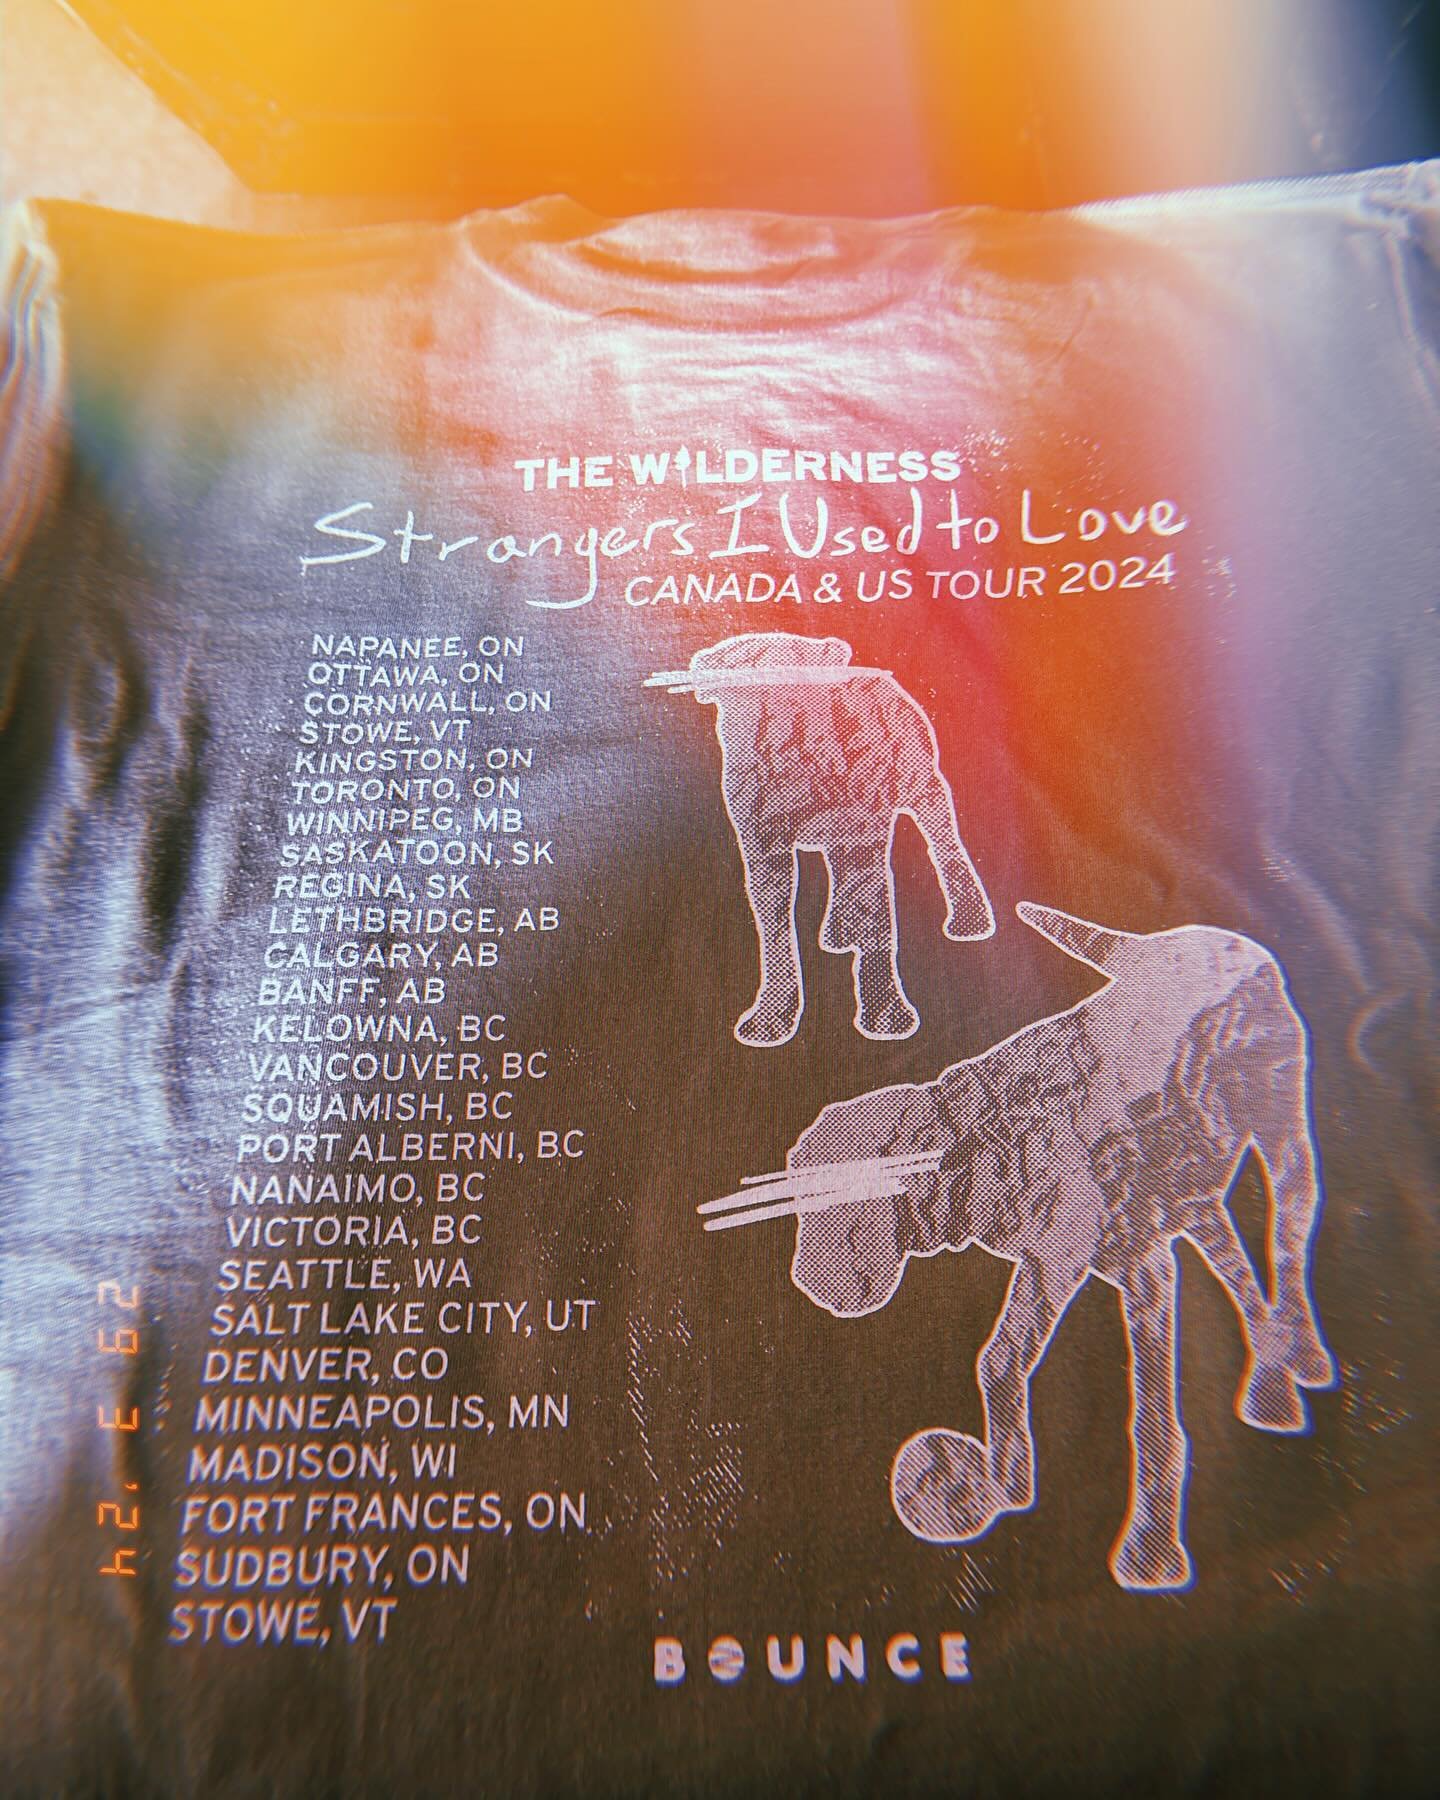 My best friends released their new album today

Strangers I Used to Love - The Wilderness

And I&rsquo;m so proud of them ✨

Come to Blu Martini tonight for their album release show!!

That&rsquo;s showbiz baby 💥